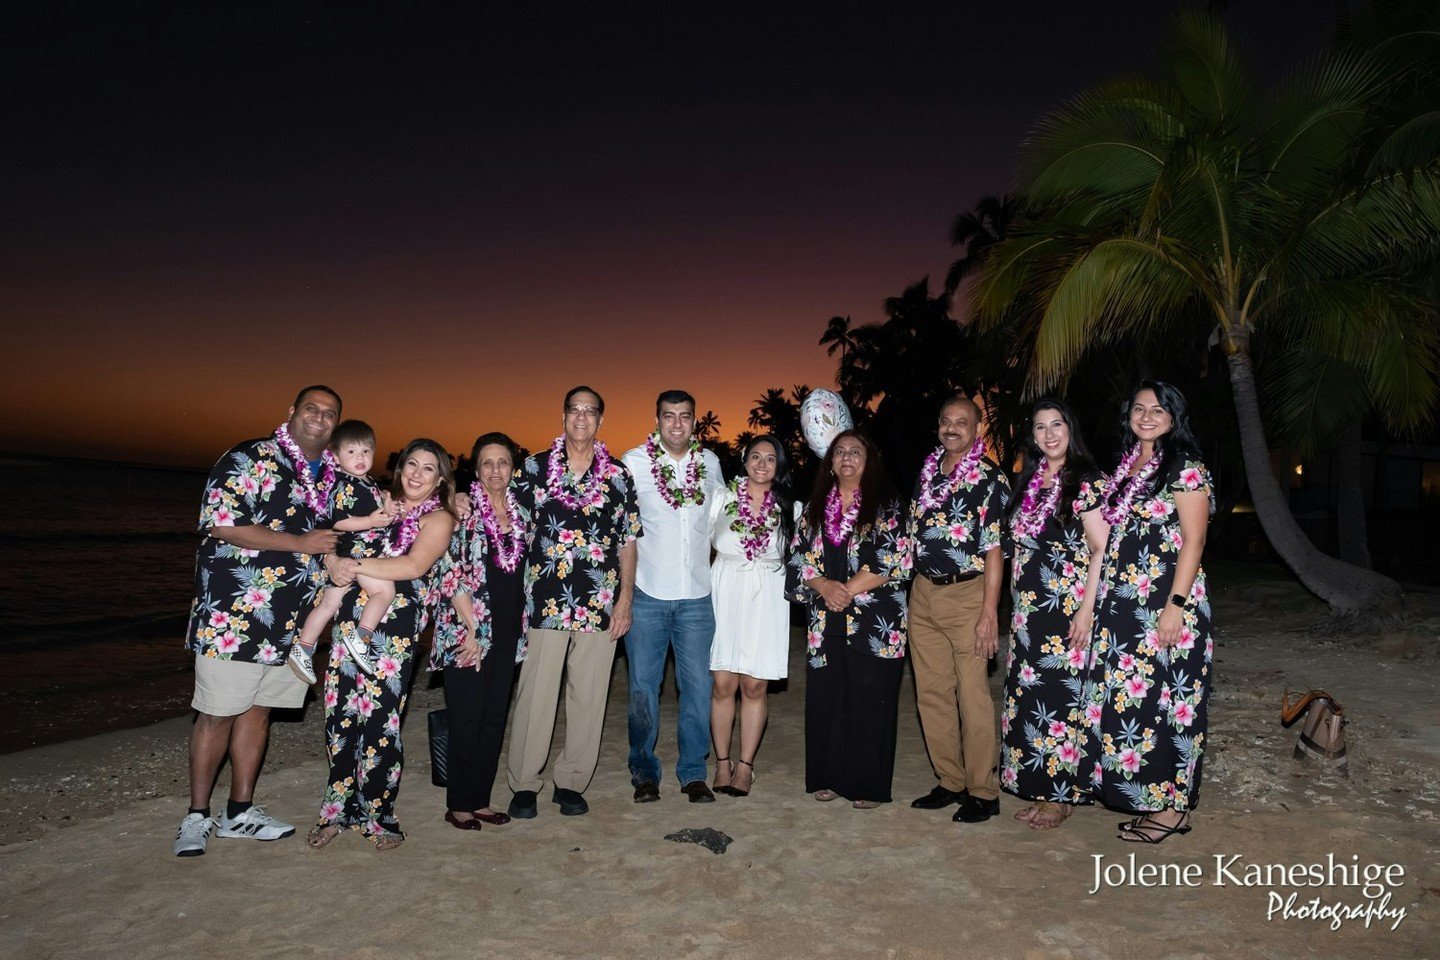 Why not share the magic of your proposal with your closest friends and family? Imagine the joy on their faces as they witness this special moment in paradise. 

#SheSaidYes #surpriseproposal #hawaiiproposal #oahuproposal #engagementphotographer #prop